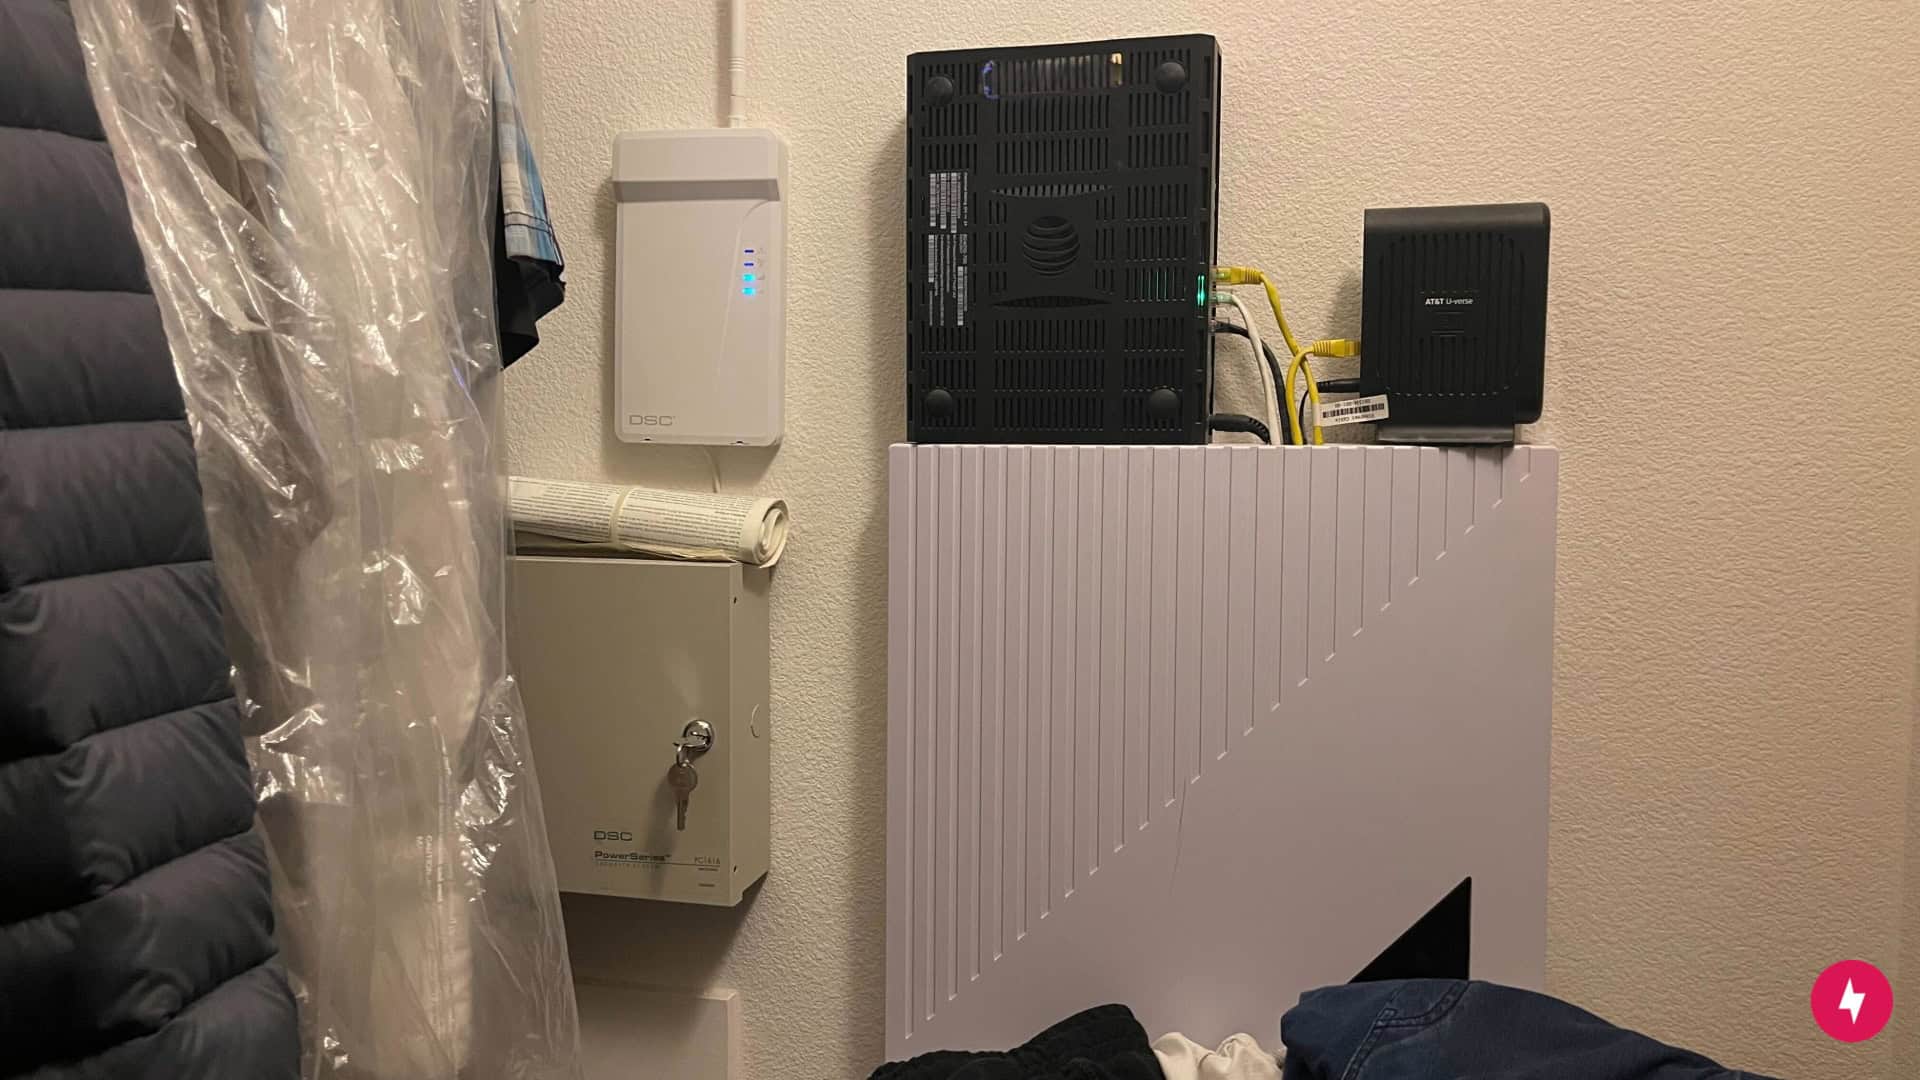 A modem and router placed in a closet.